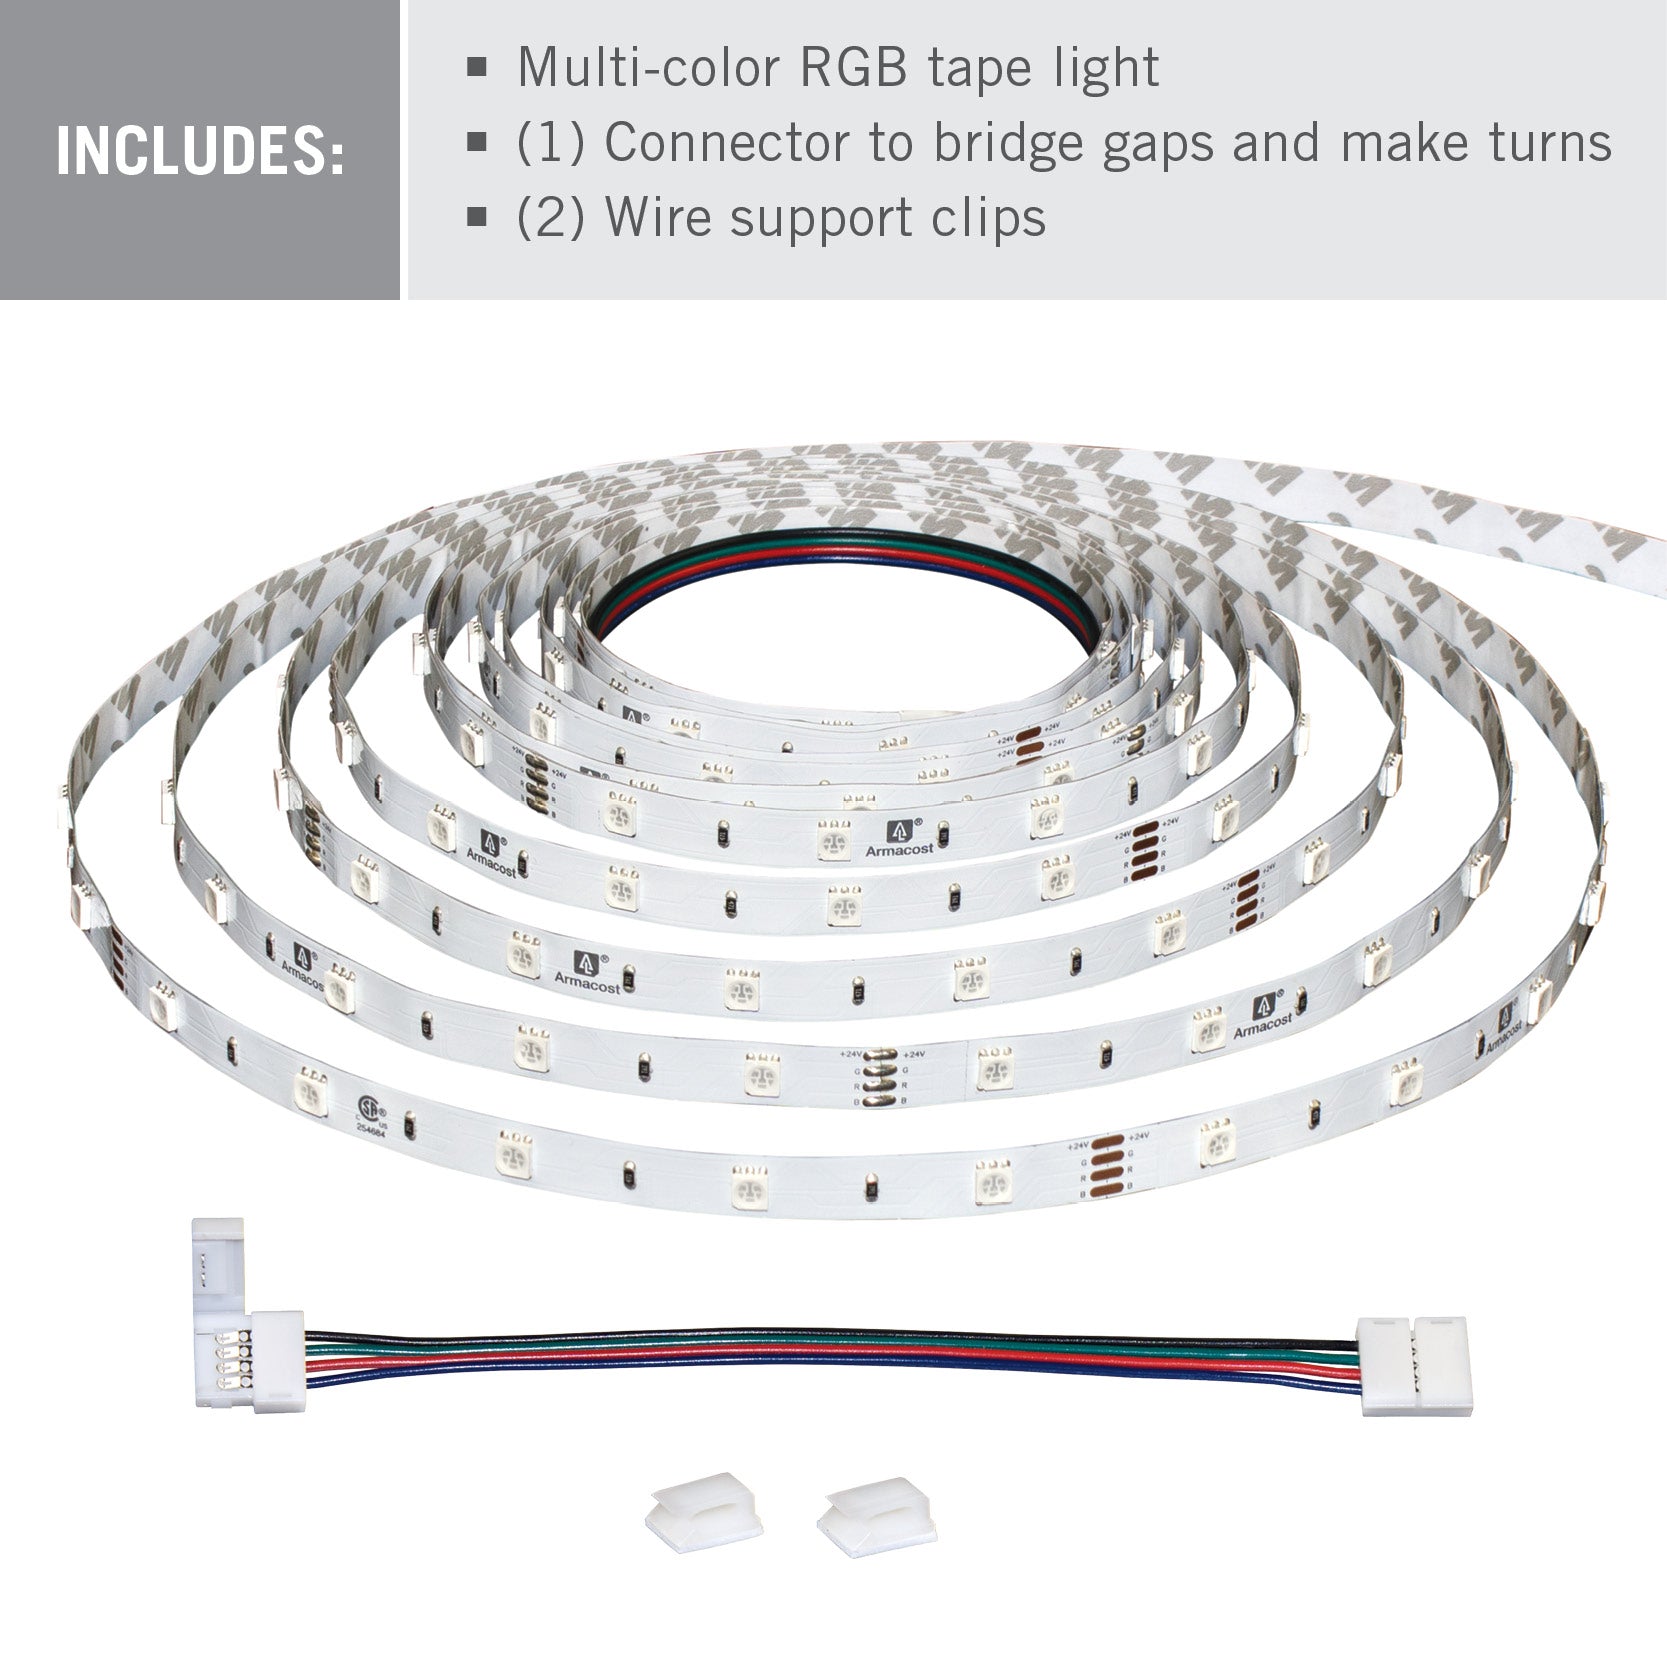 in stand houden Zeeziekte Stoutmoedig 24V RGB LED Strip Light Tape 30 LED/m – Armacost Lighting